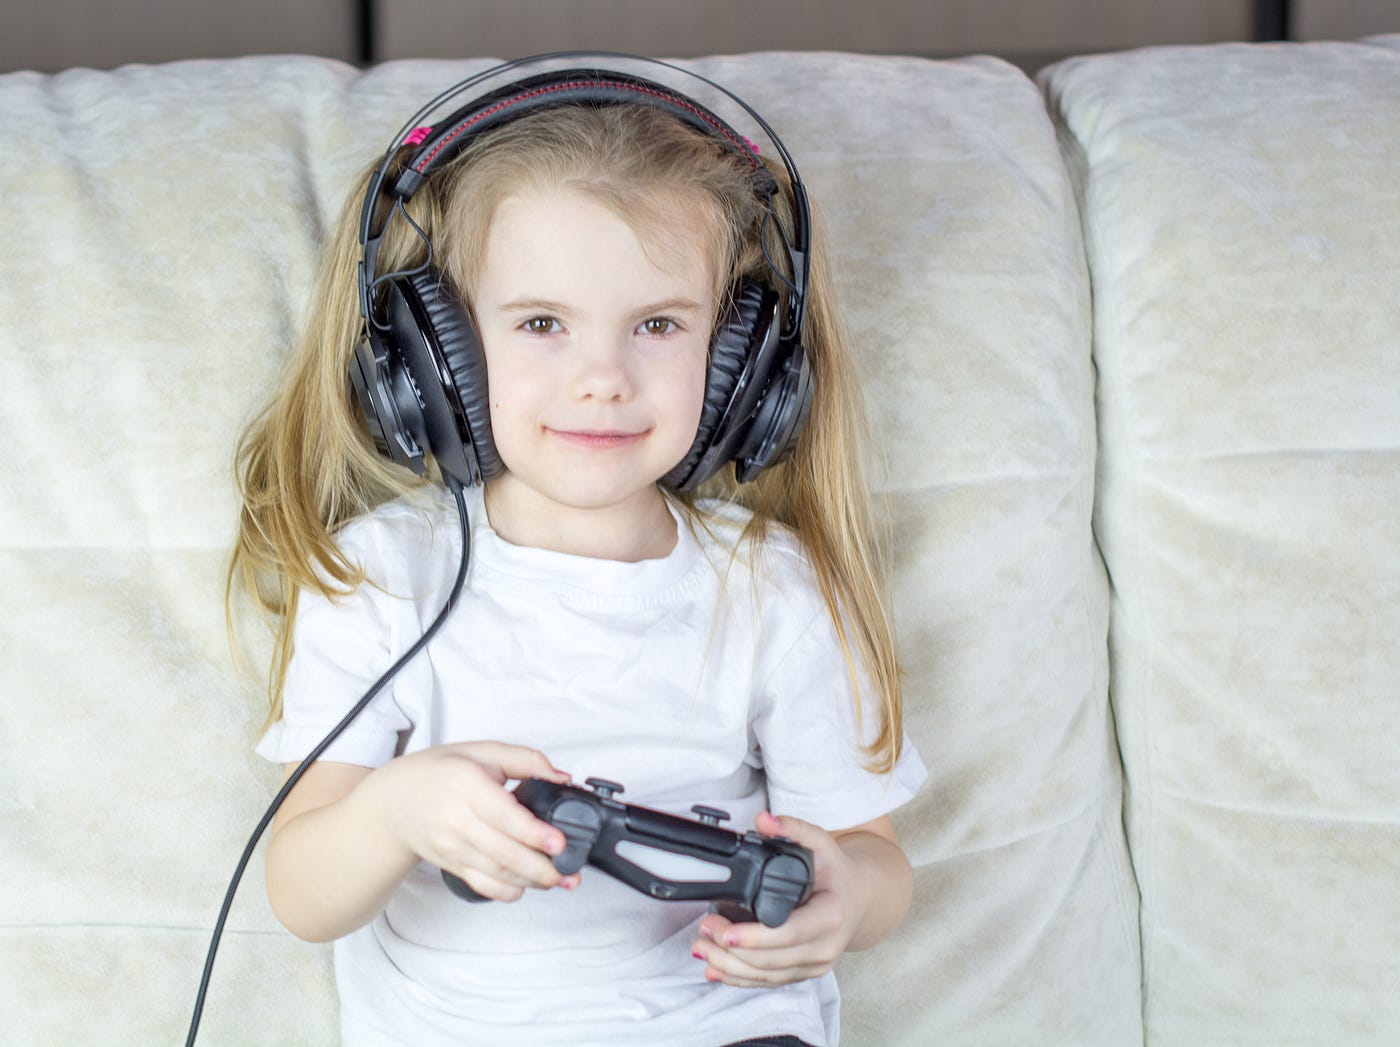 Kids Channels for Gamers